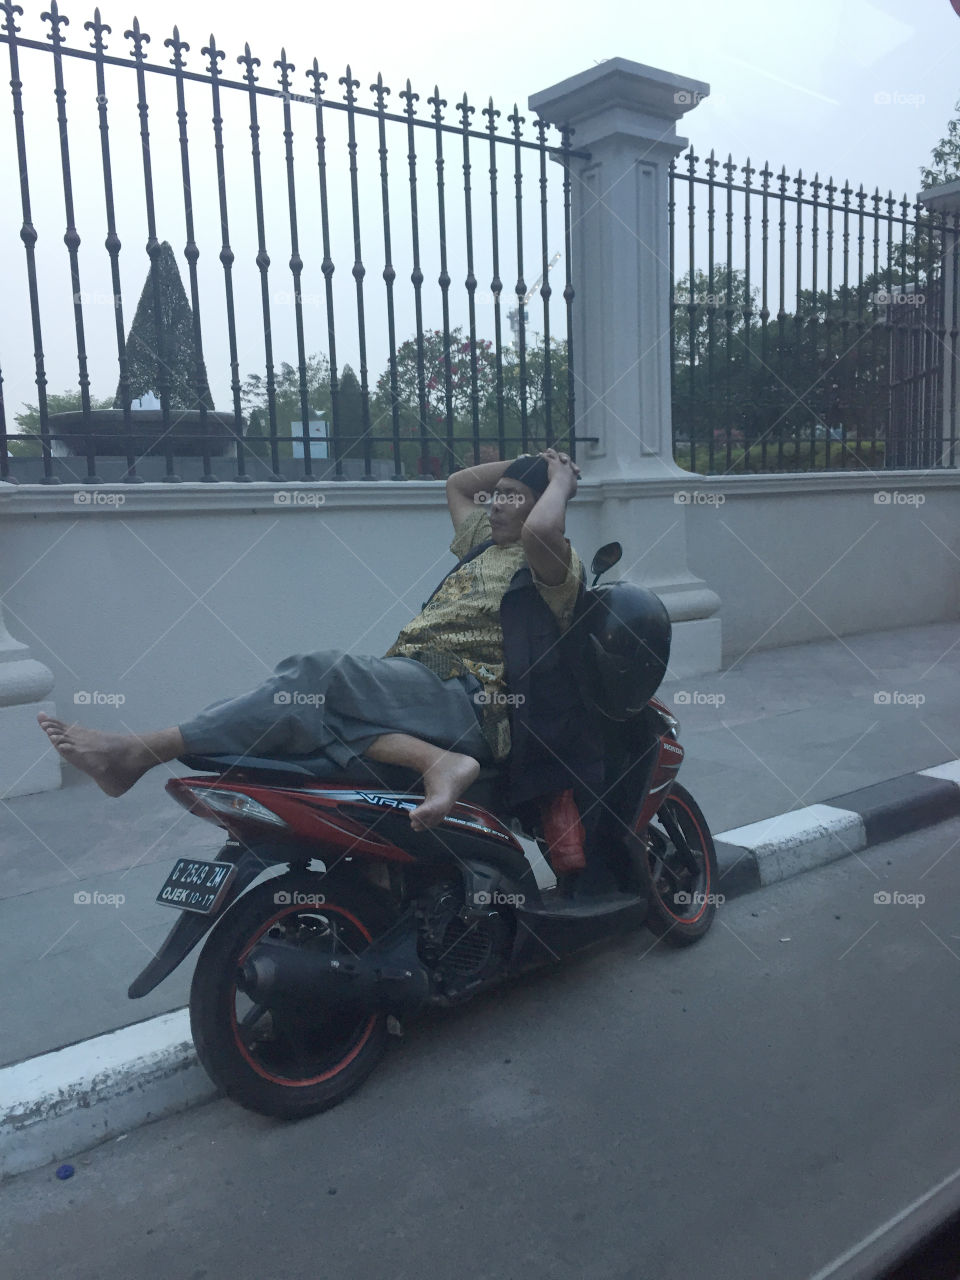 Motorcycle rest